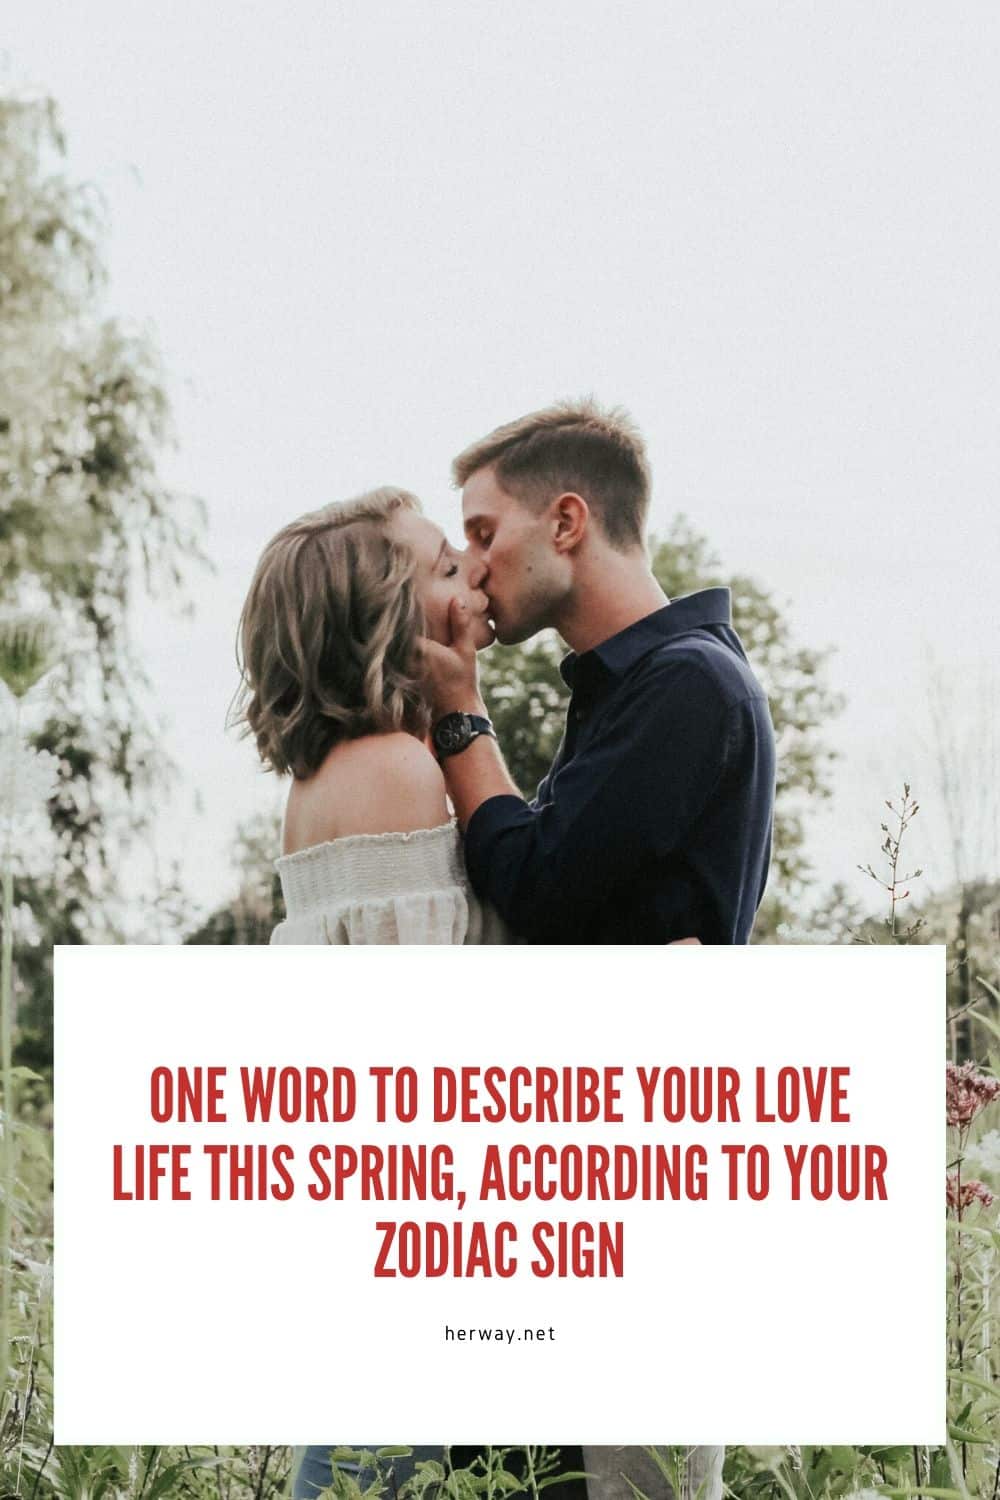 One Word To Describe Your Love Life This Spring, According To Your Zodiac Sign